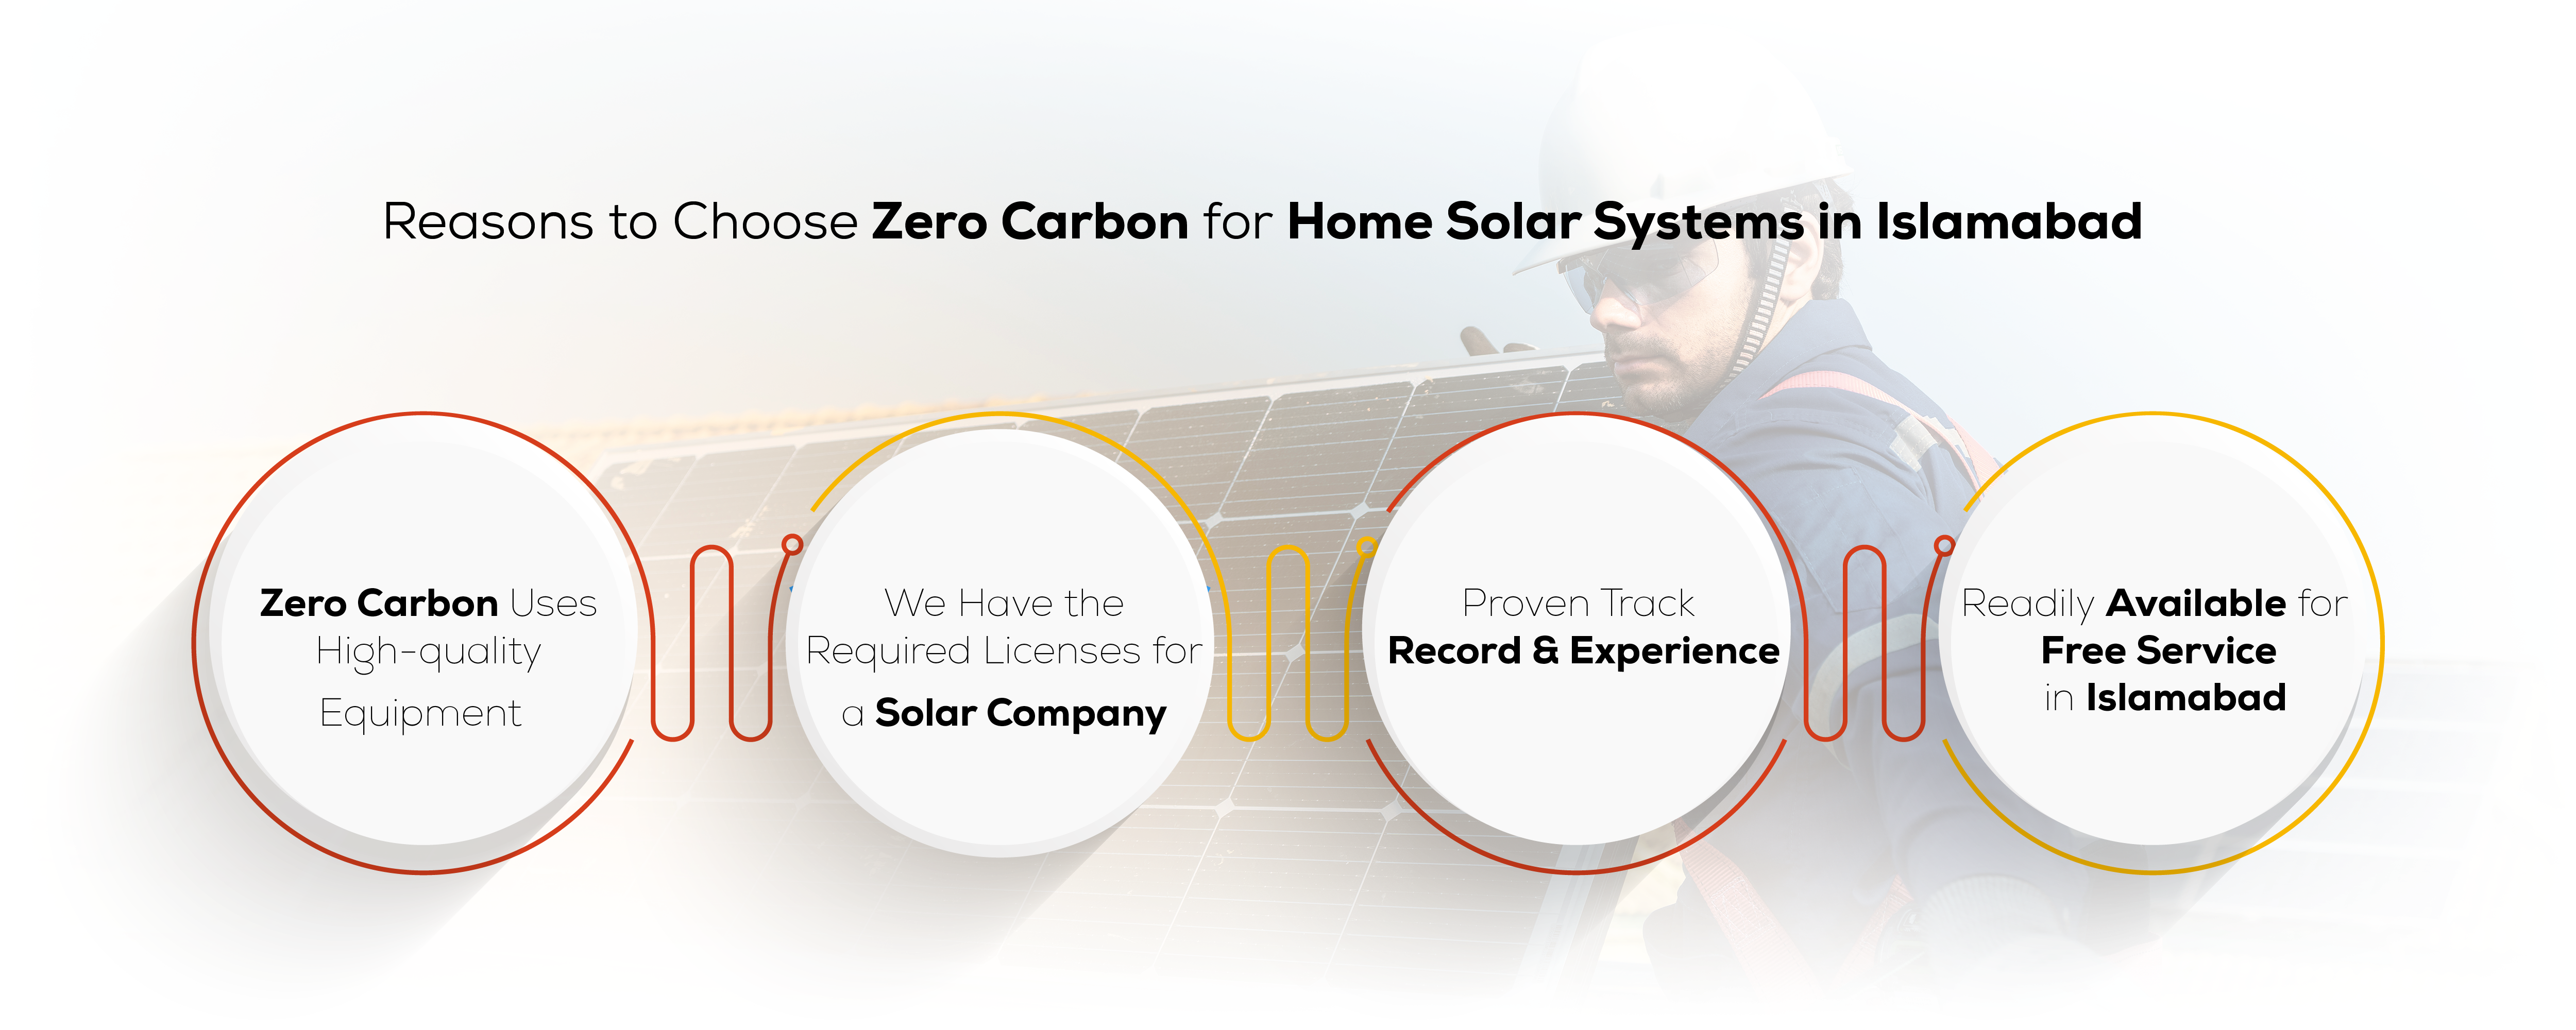 How to Choose a Provider for Home Solar Systems in Islamabad